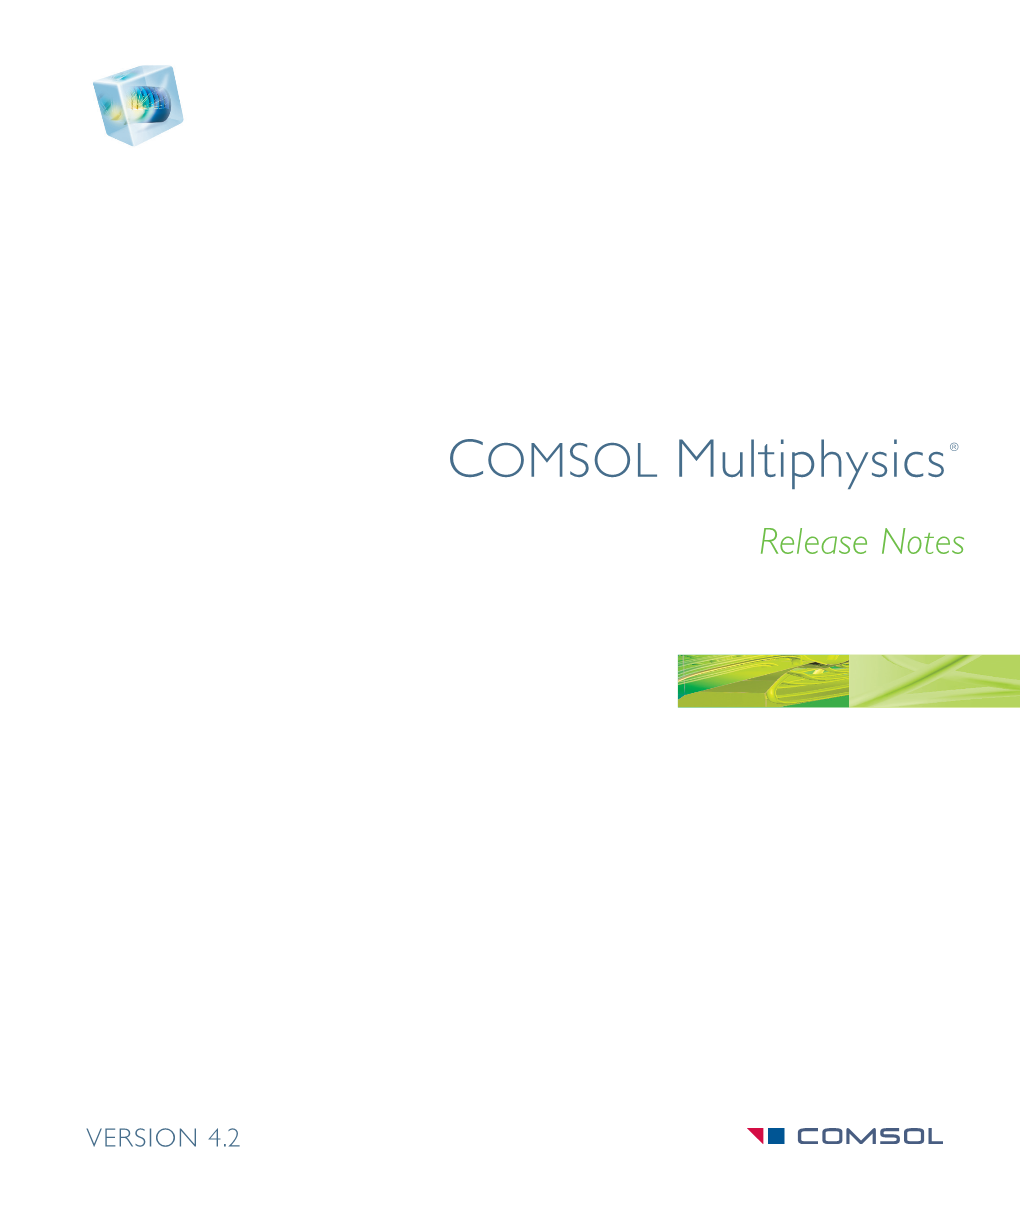 COMSOL Multiphysics Version 4.2 Contains Many New Functions and Additional Products